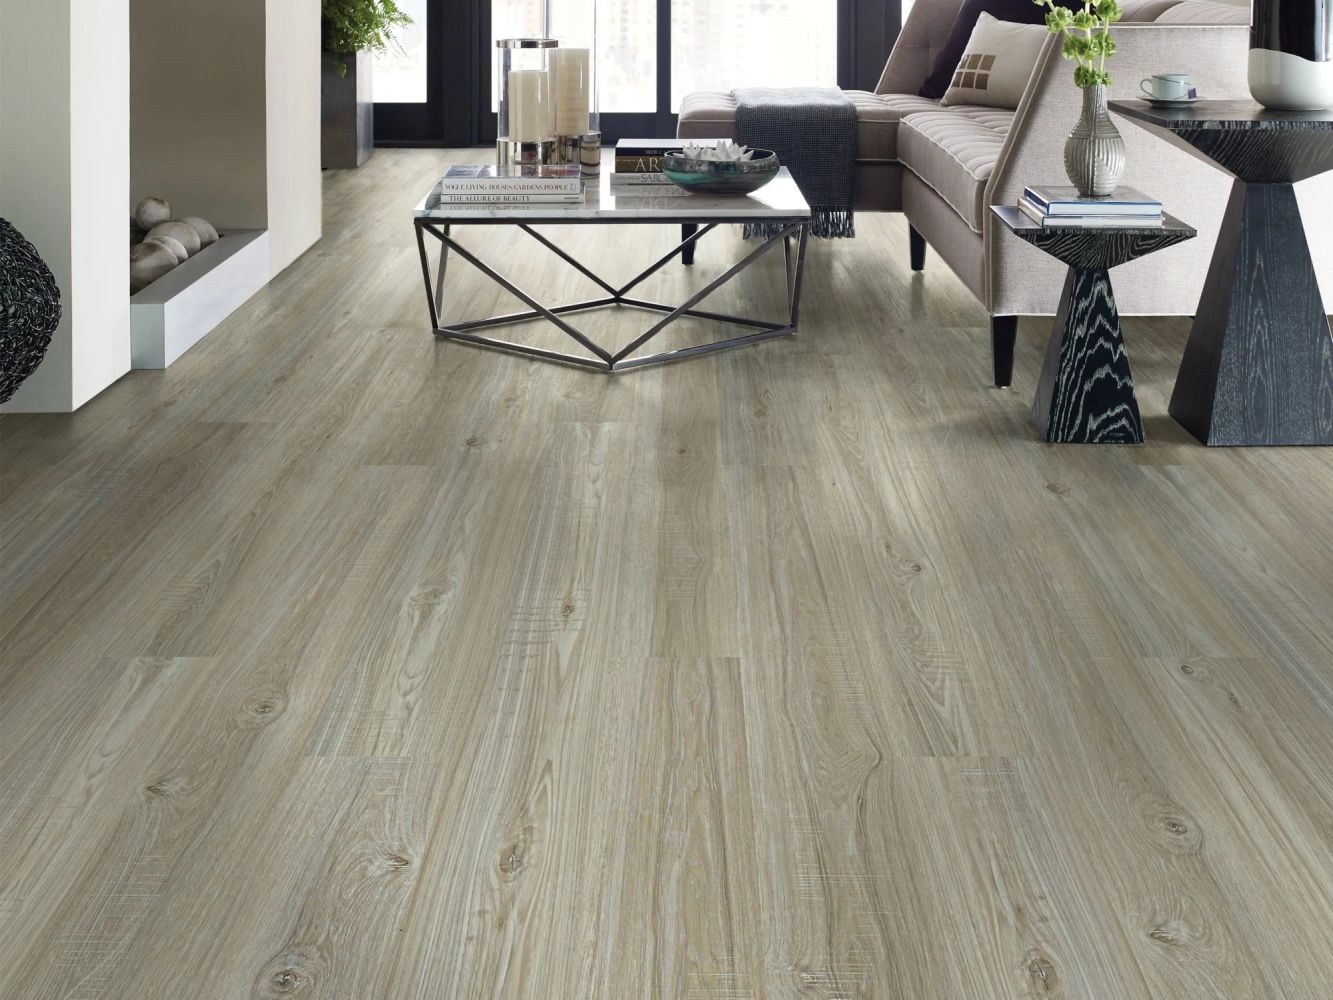 Shaw Floors Resilient Residential Impact Plus Washed Oak 00509_2031V